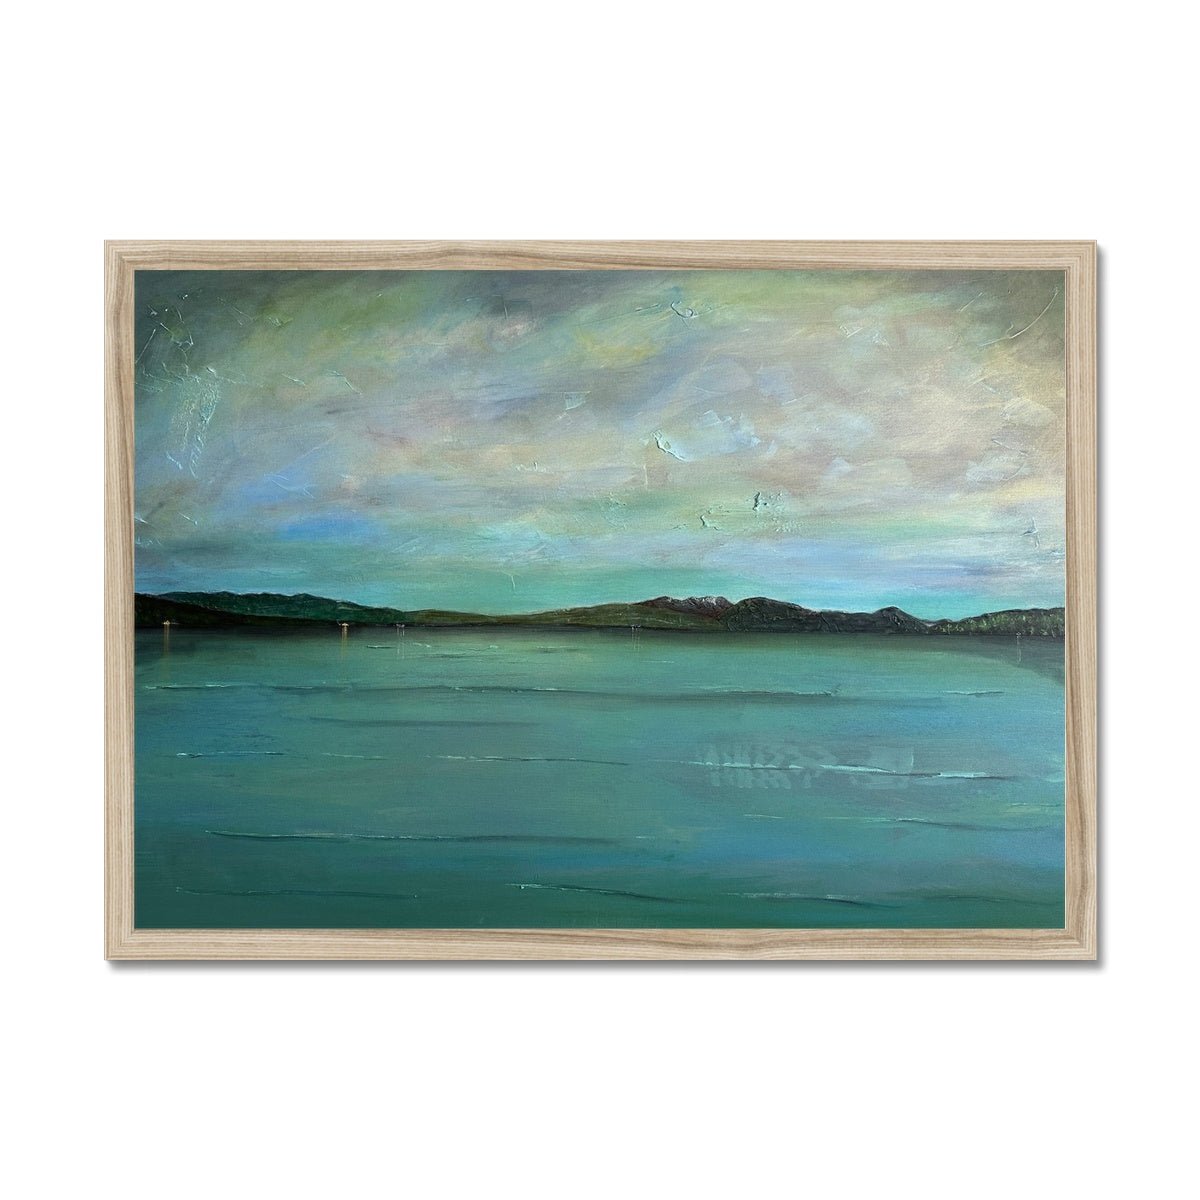 An Emerald Loch Lomond Painting | Framed Prints From Scotland-Framed Prints-Scottish Lochs & Mountains Art Gallery-A2 Landscape-Natural Frame-Paintings, Prints, Homeware, Art Gifts From Scotland By Scottish Artist Kevin Hunter